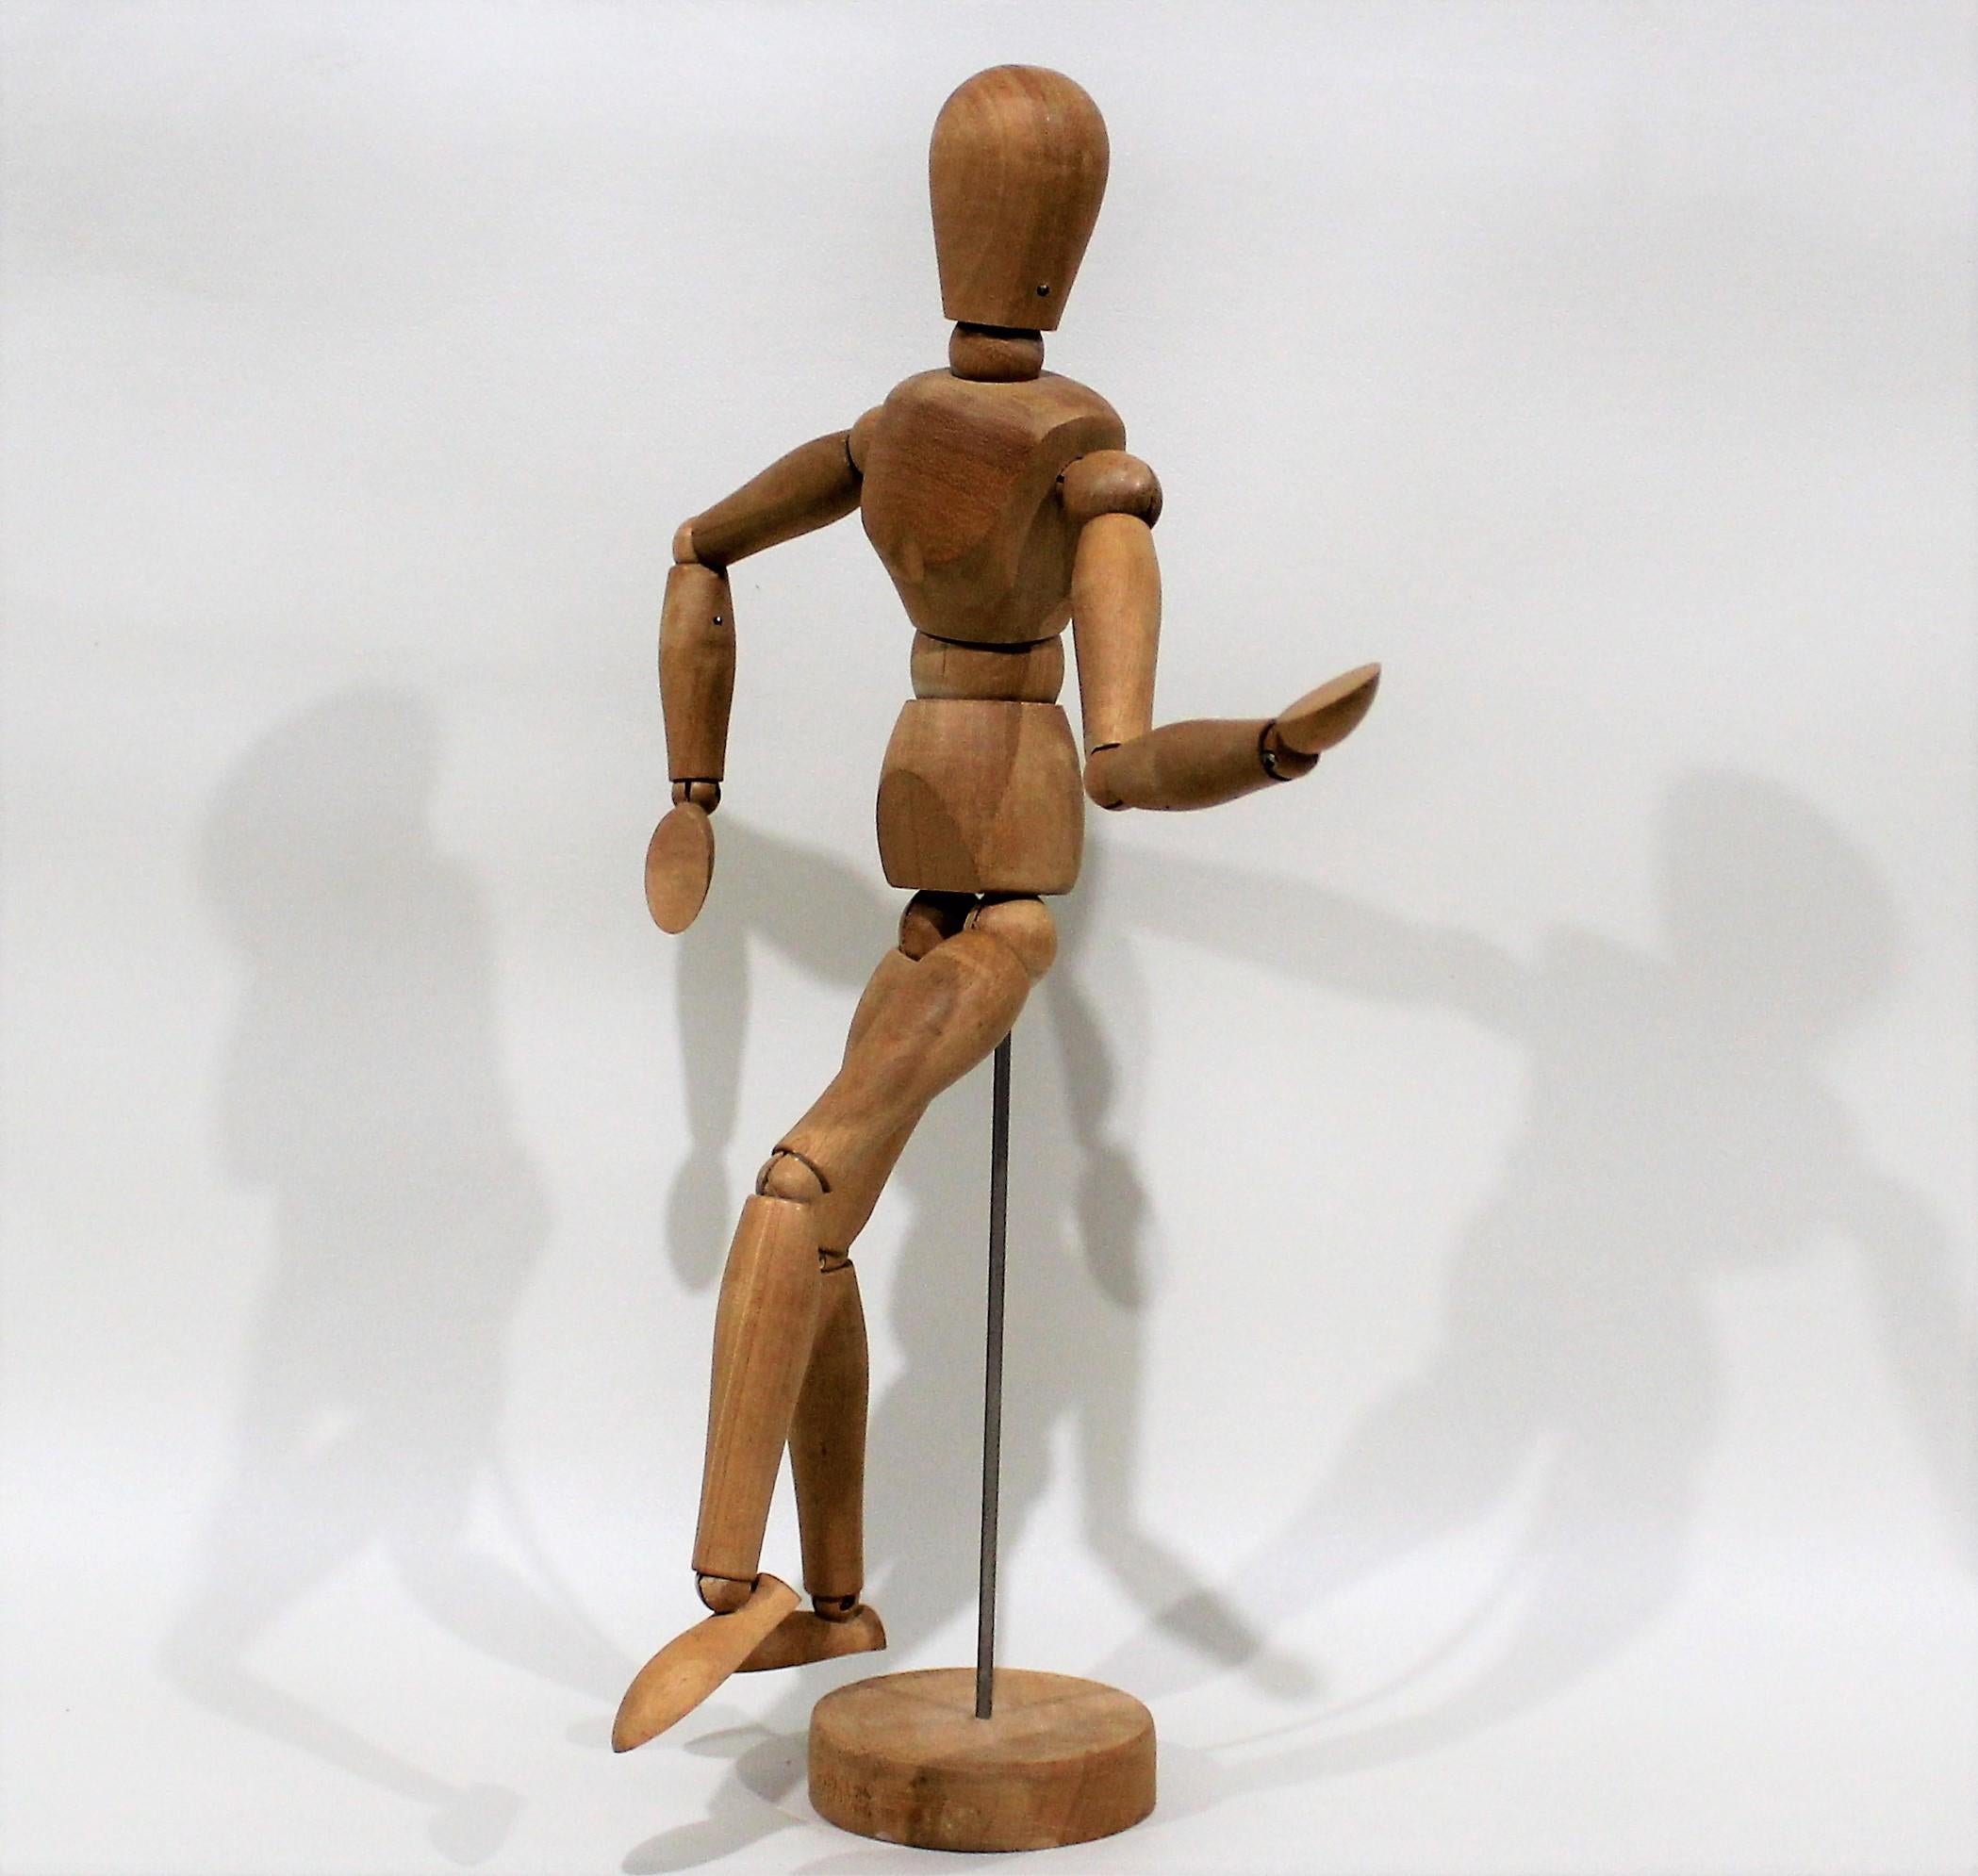 Vintage Articulated and Jointed Wooden Metal Figure In Good Condition For Sale In Hamilton, Ontario